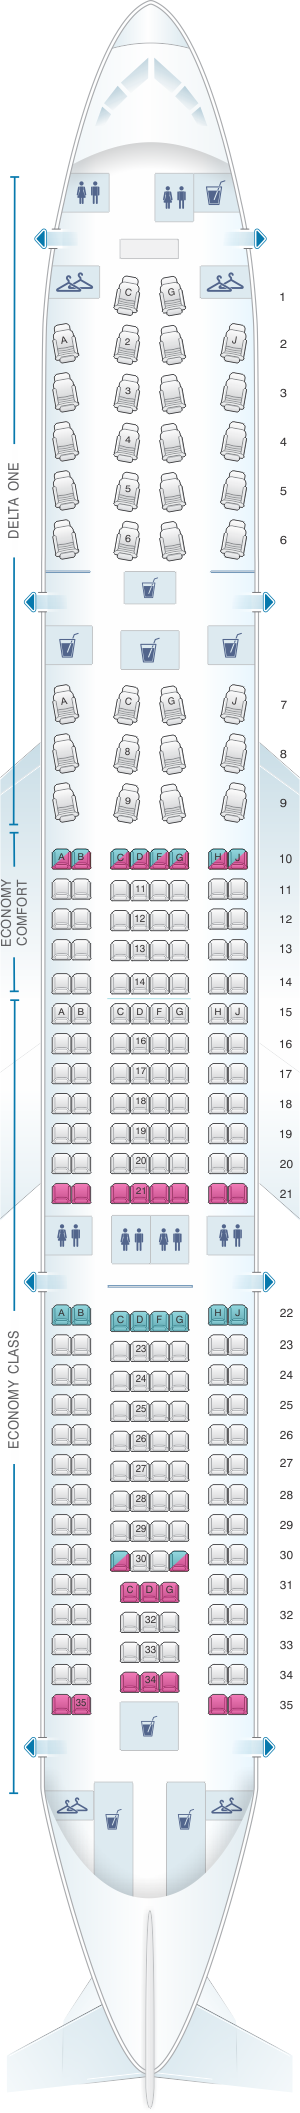 Delta Airbus A330 200 Seat Map